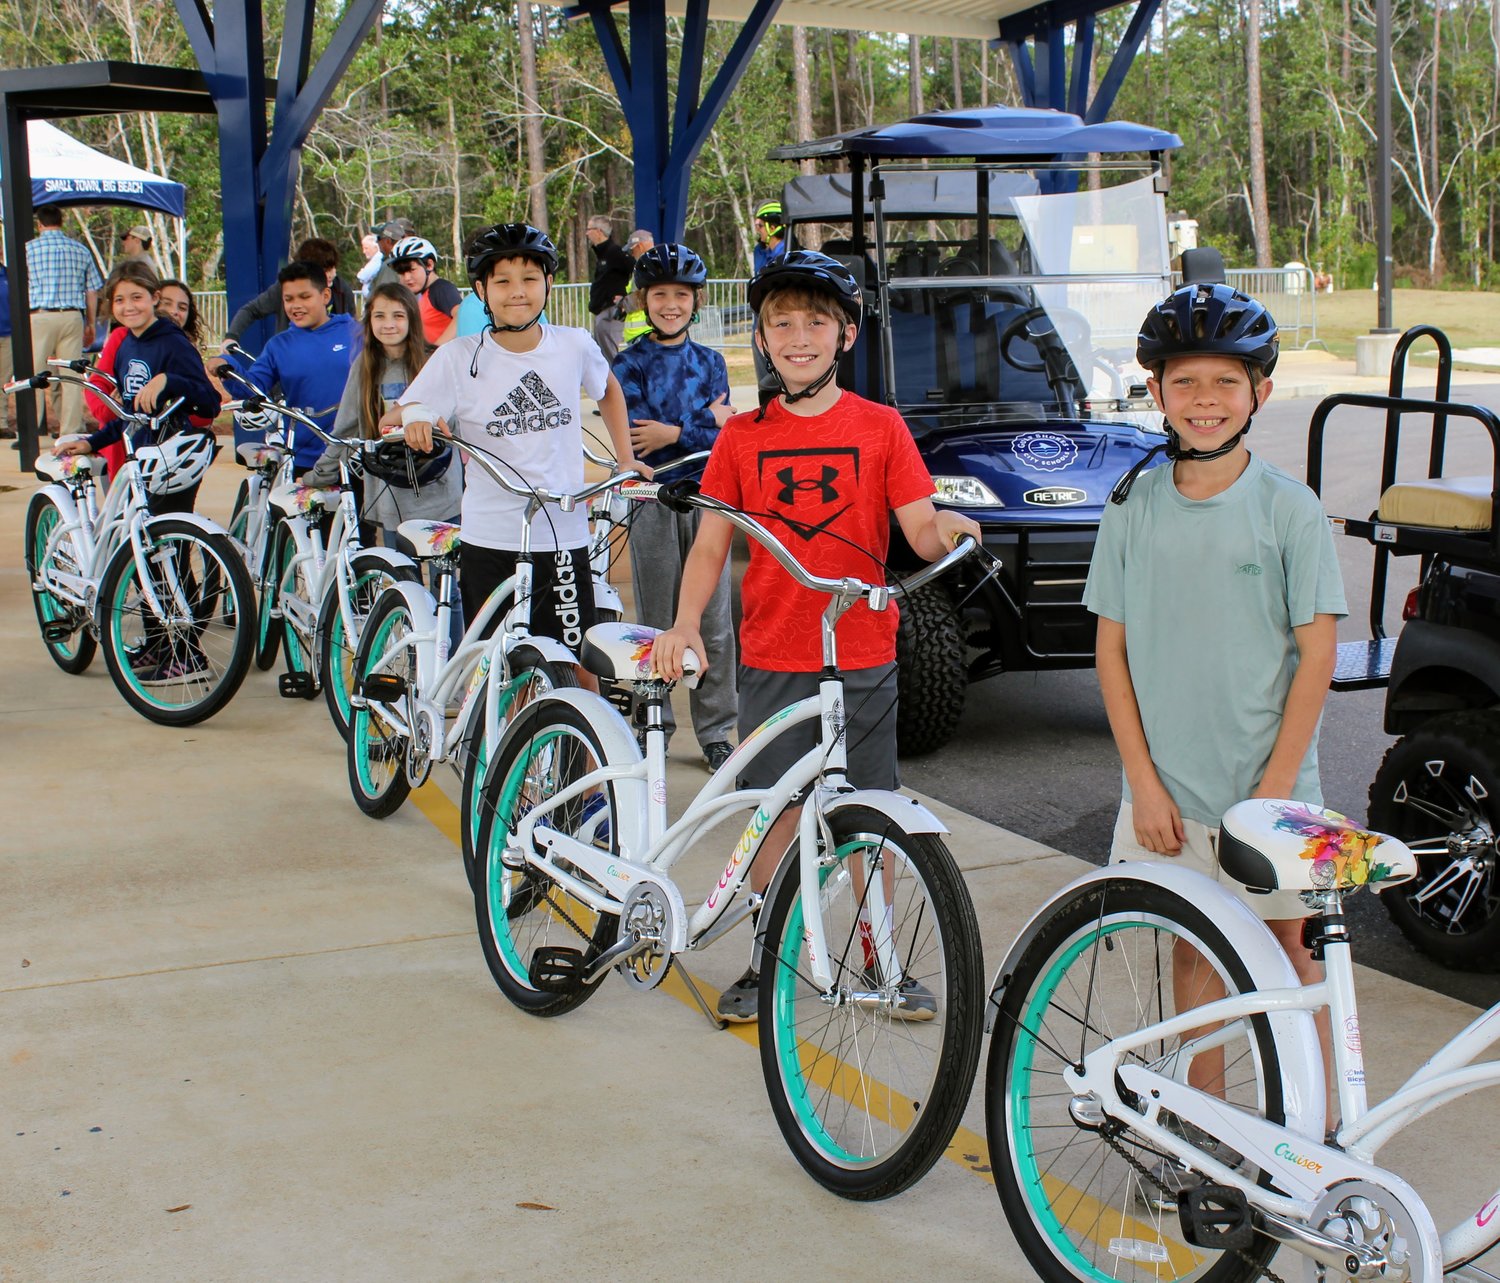 Kerry Dey’s fifth grade class is ready to hit the trails of Gulf State Park for their first biking field trip.